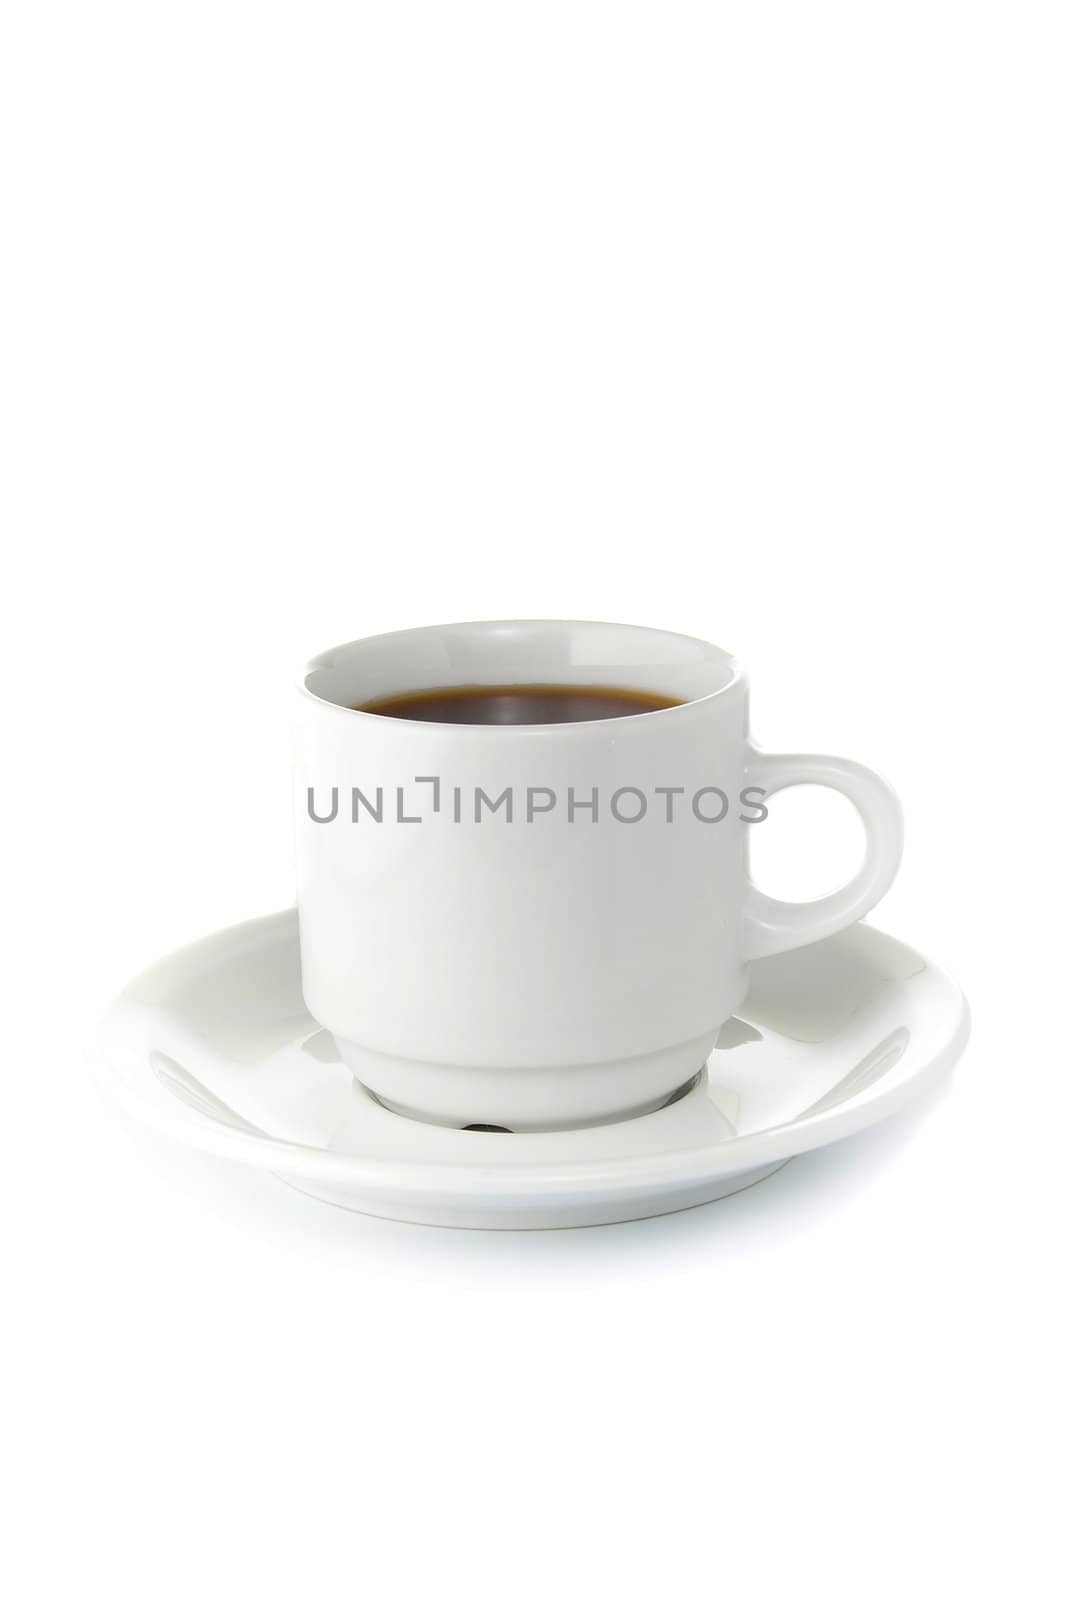 Coffe, tea cup  isolated on white background